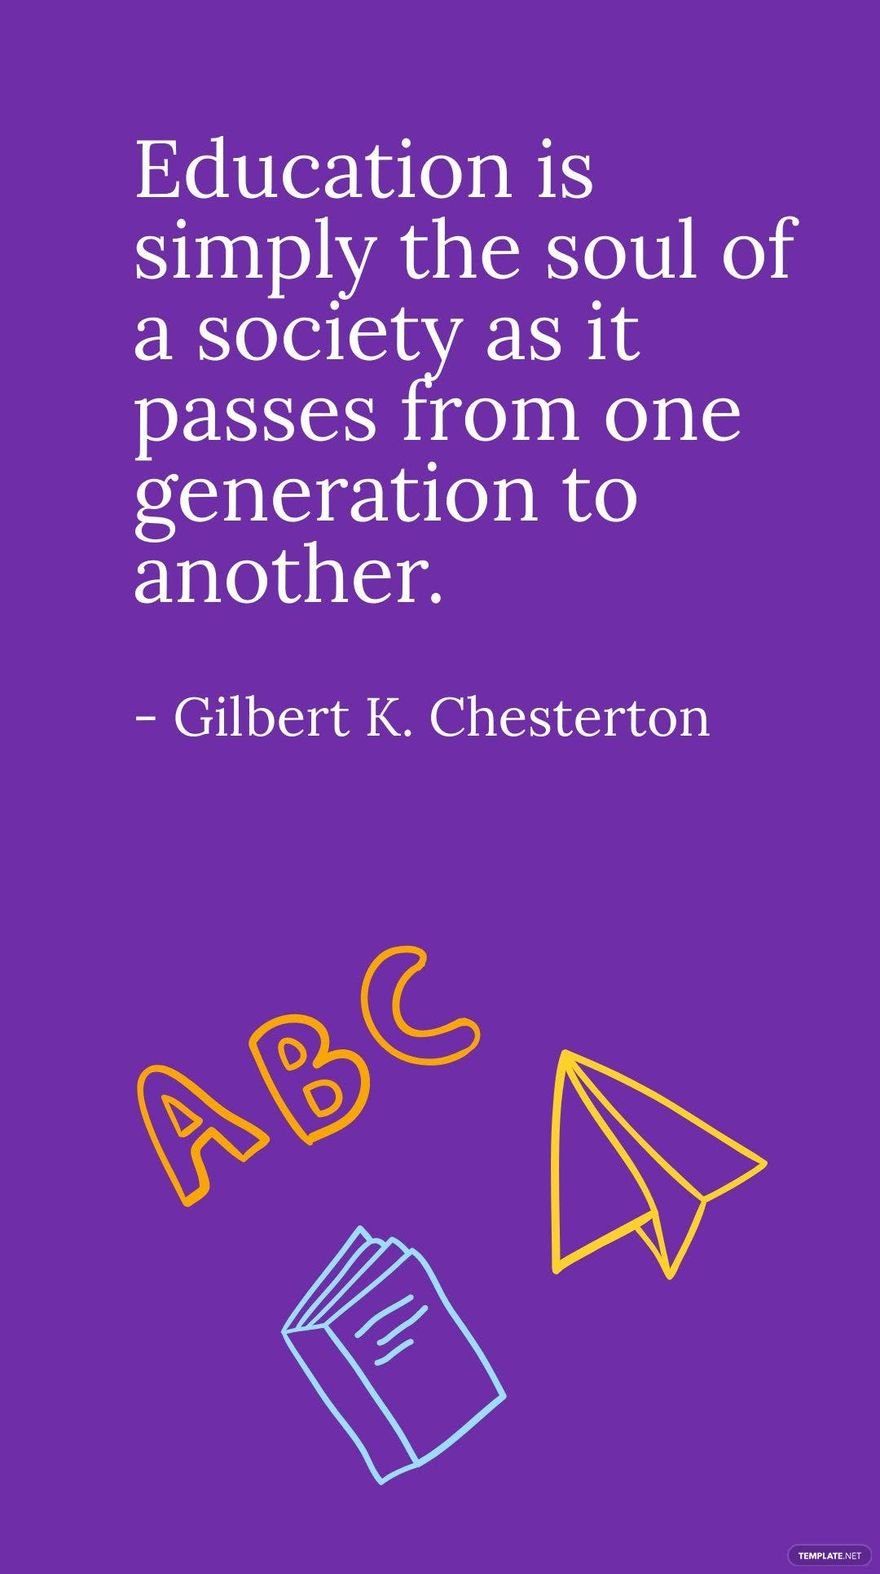 Free Gilbert K. Chesterton - Education is simply the soul of a society as it passes from one generation to another. in JPG